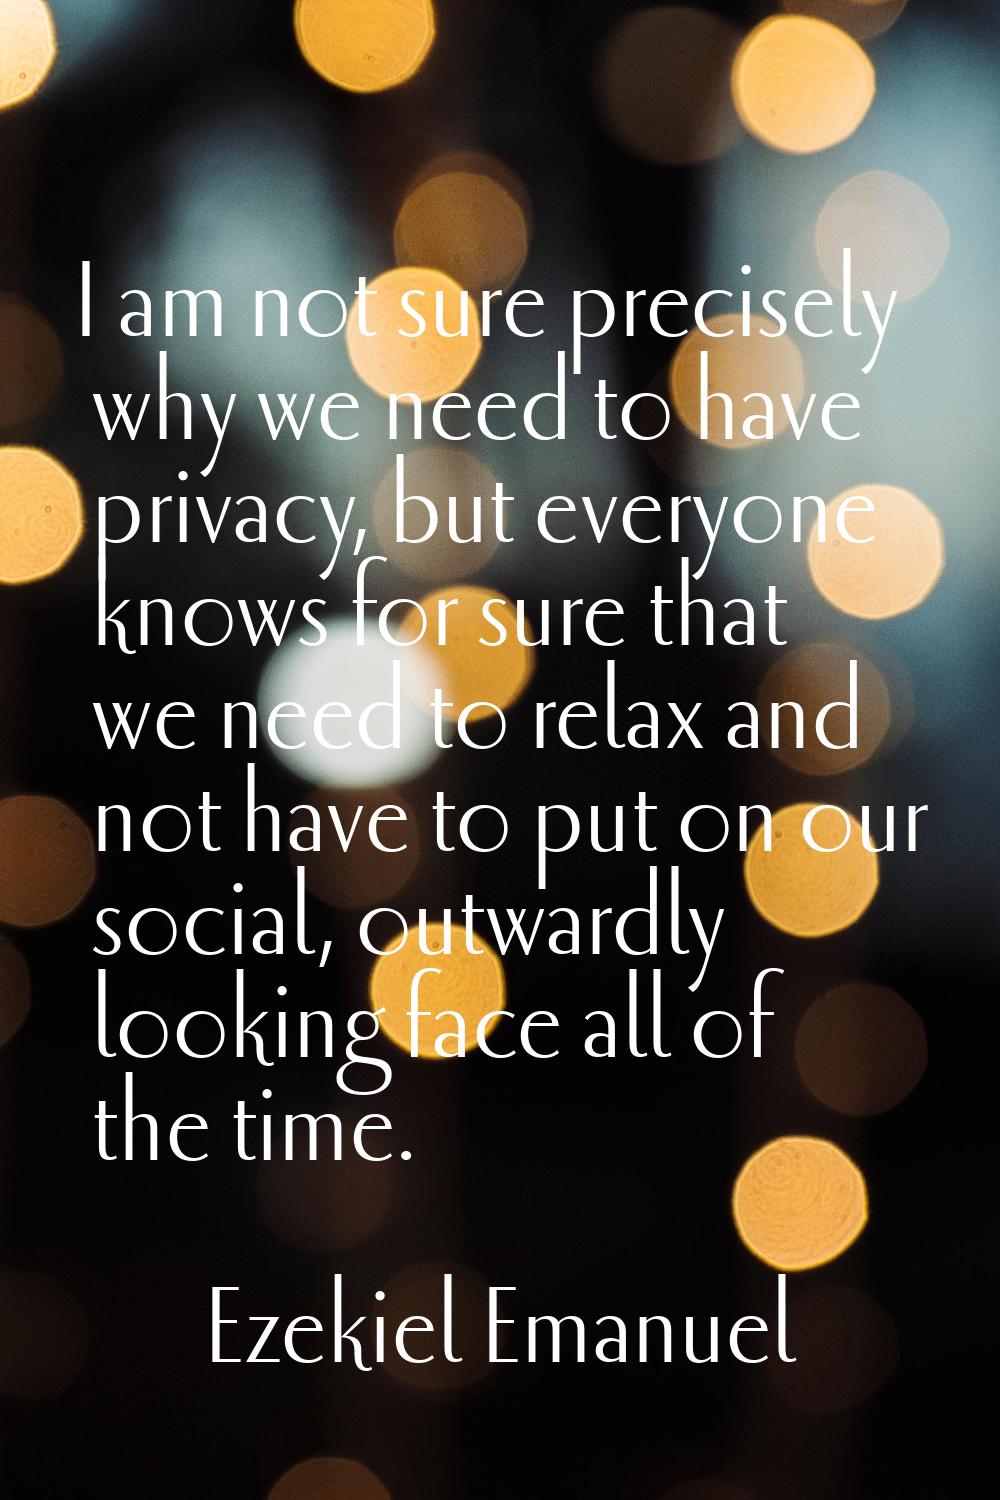 I am not sure precisely why we need to have privacy, but everyone knows for sure that we need to re